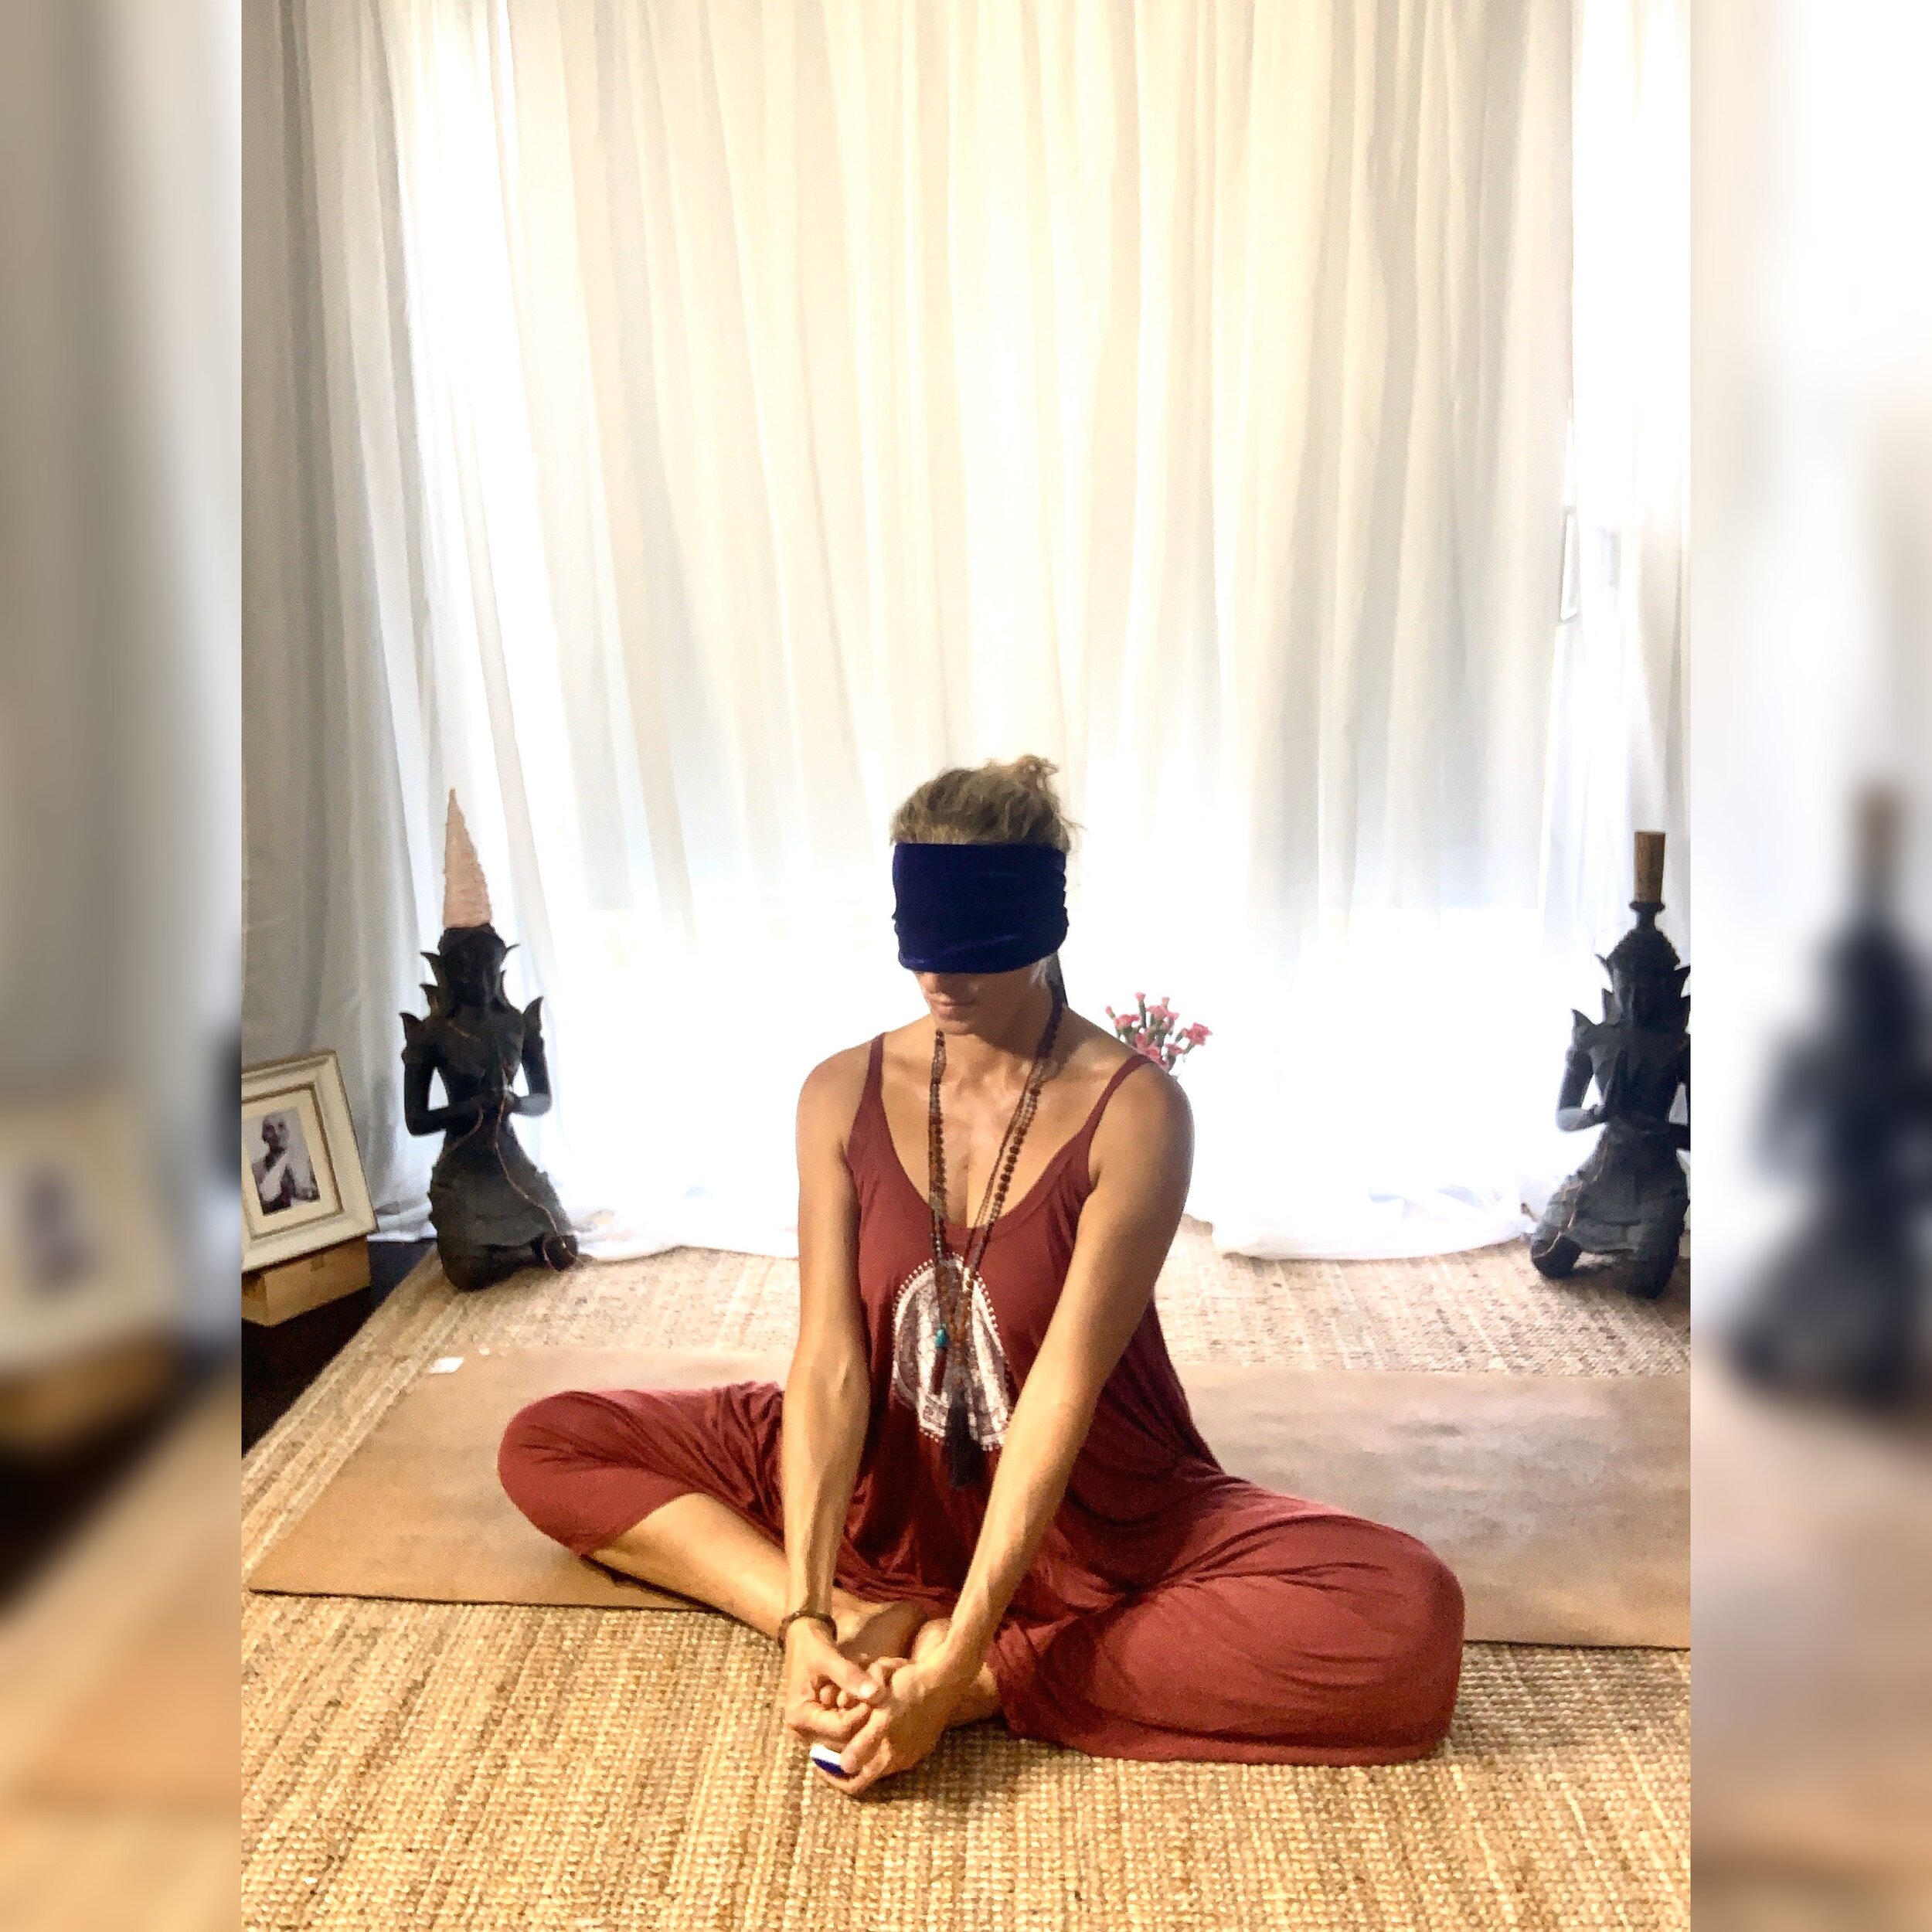 What is Blindfold Yoga and how to practice it?